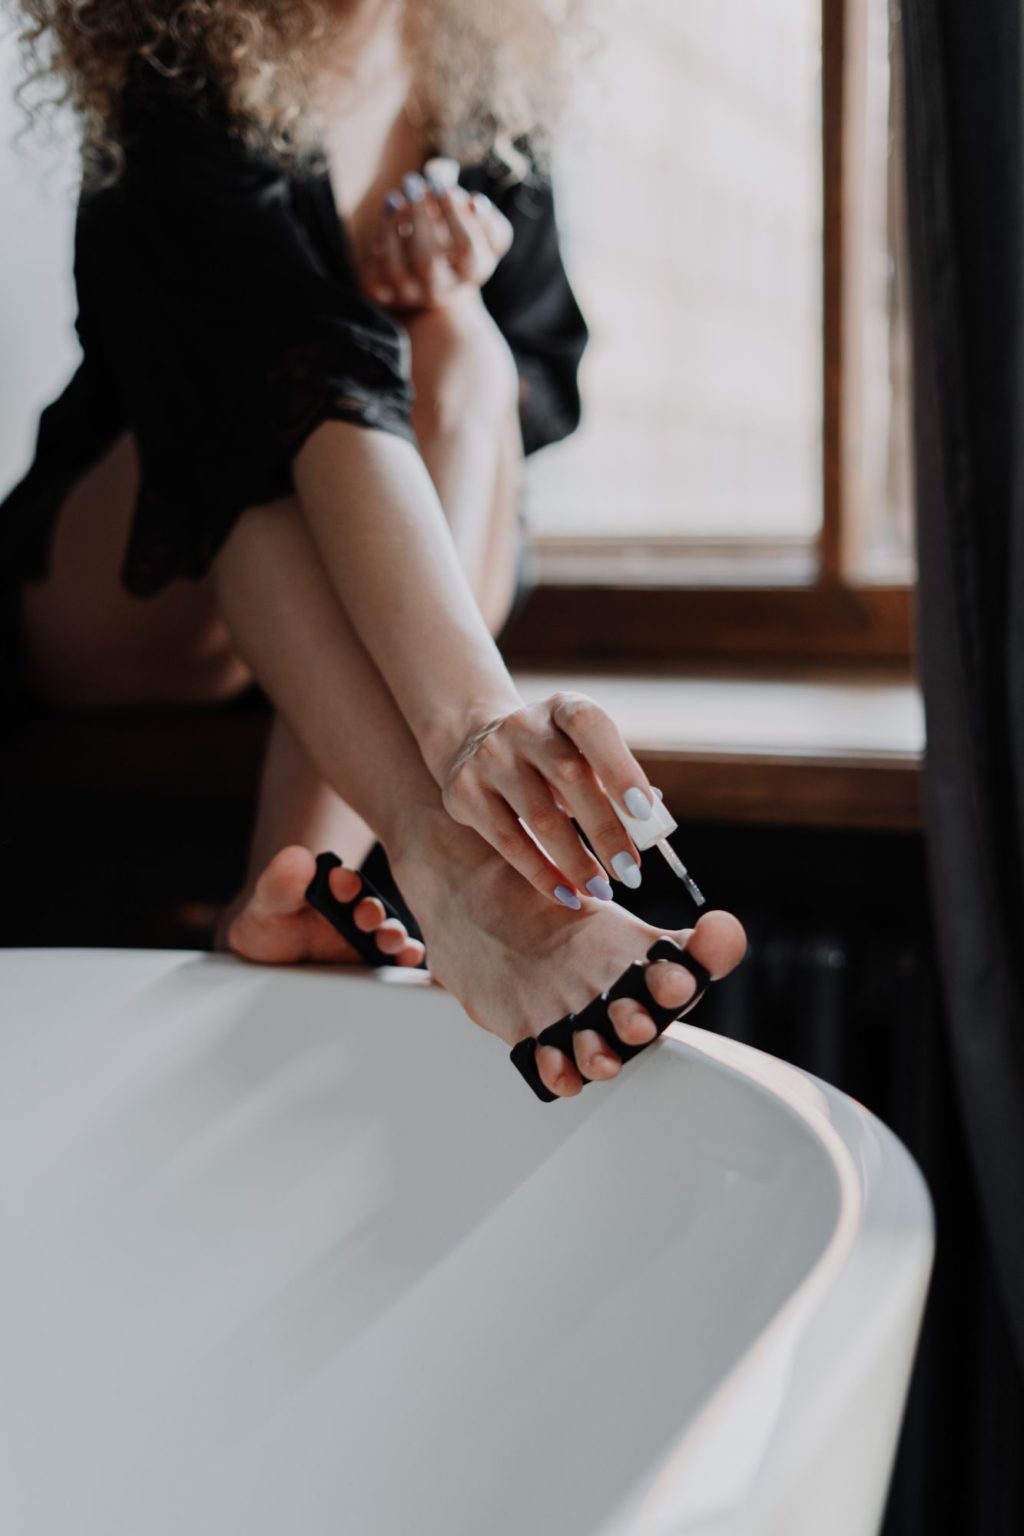 Pre-Wedding Foot Prep To Get Your Feet Ready For Your Wedding Shoes